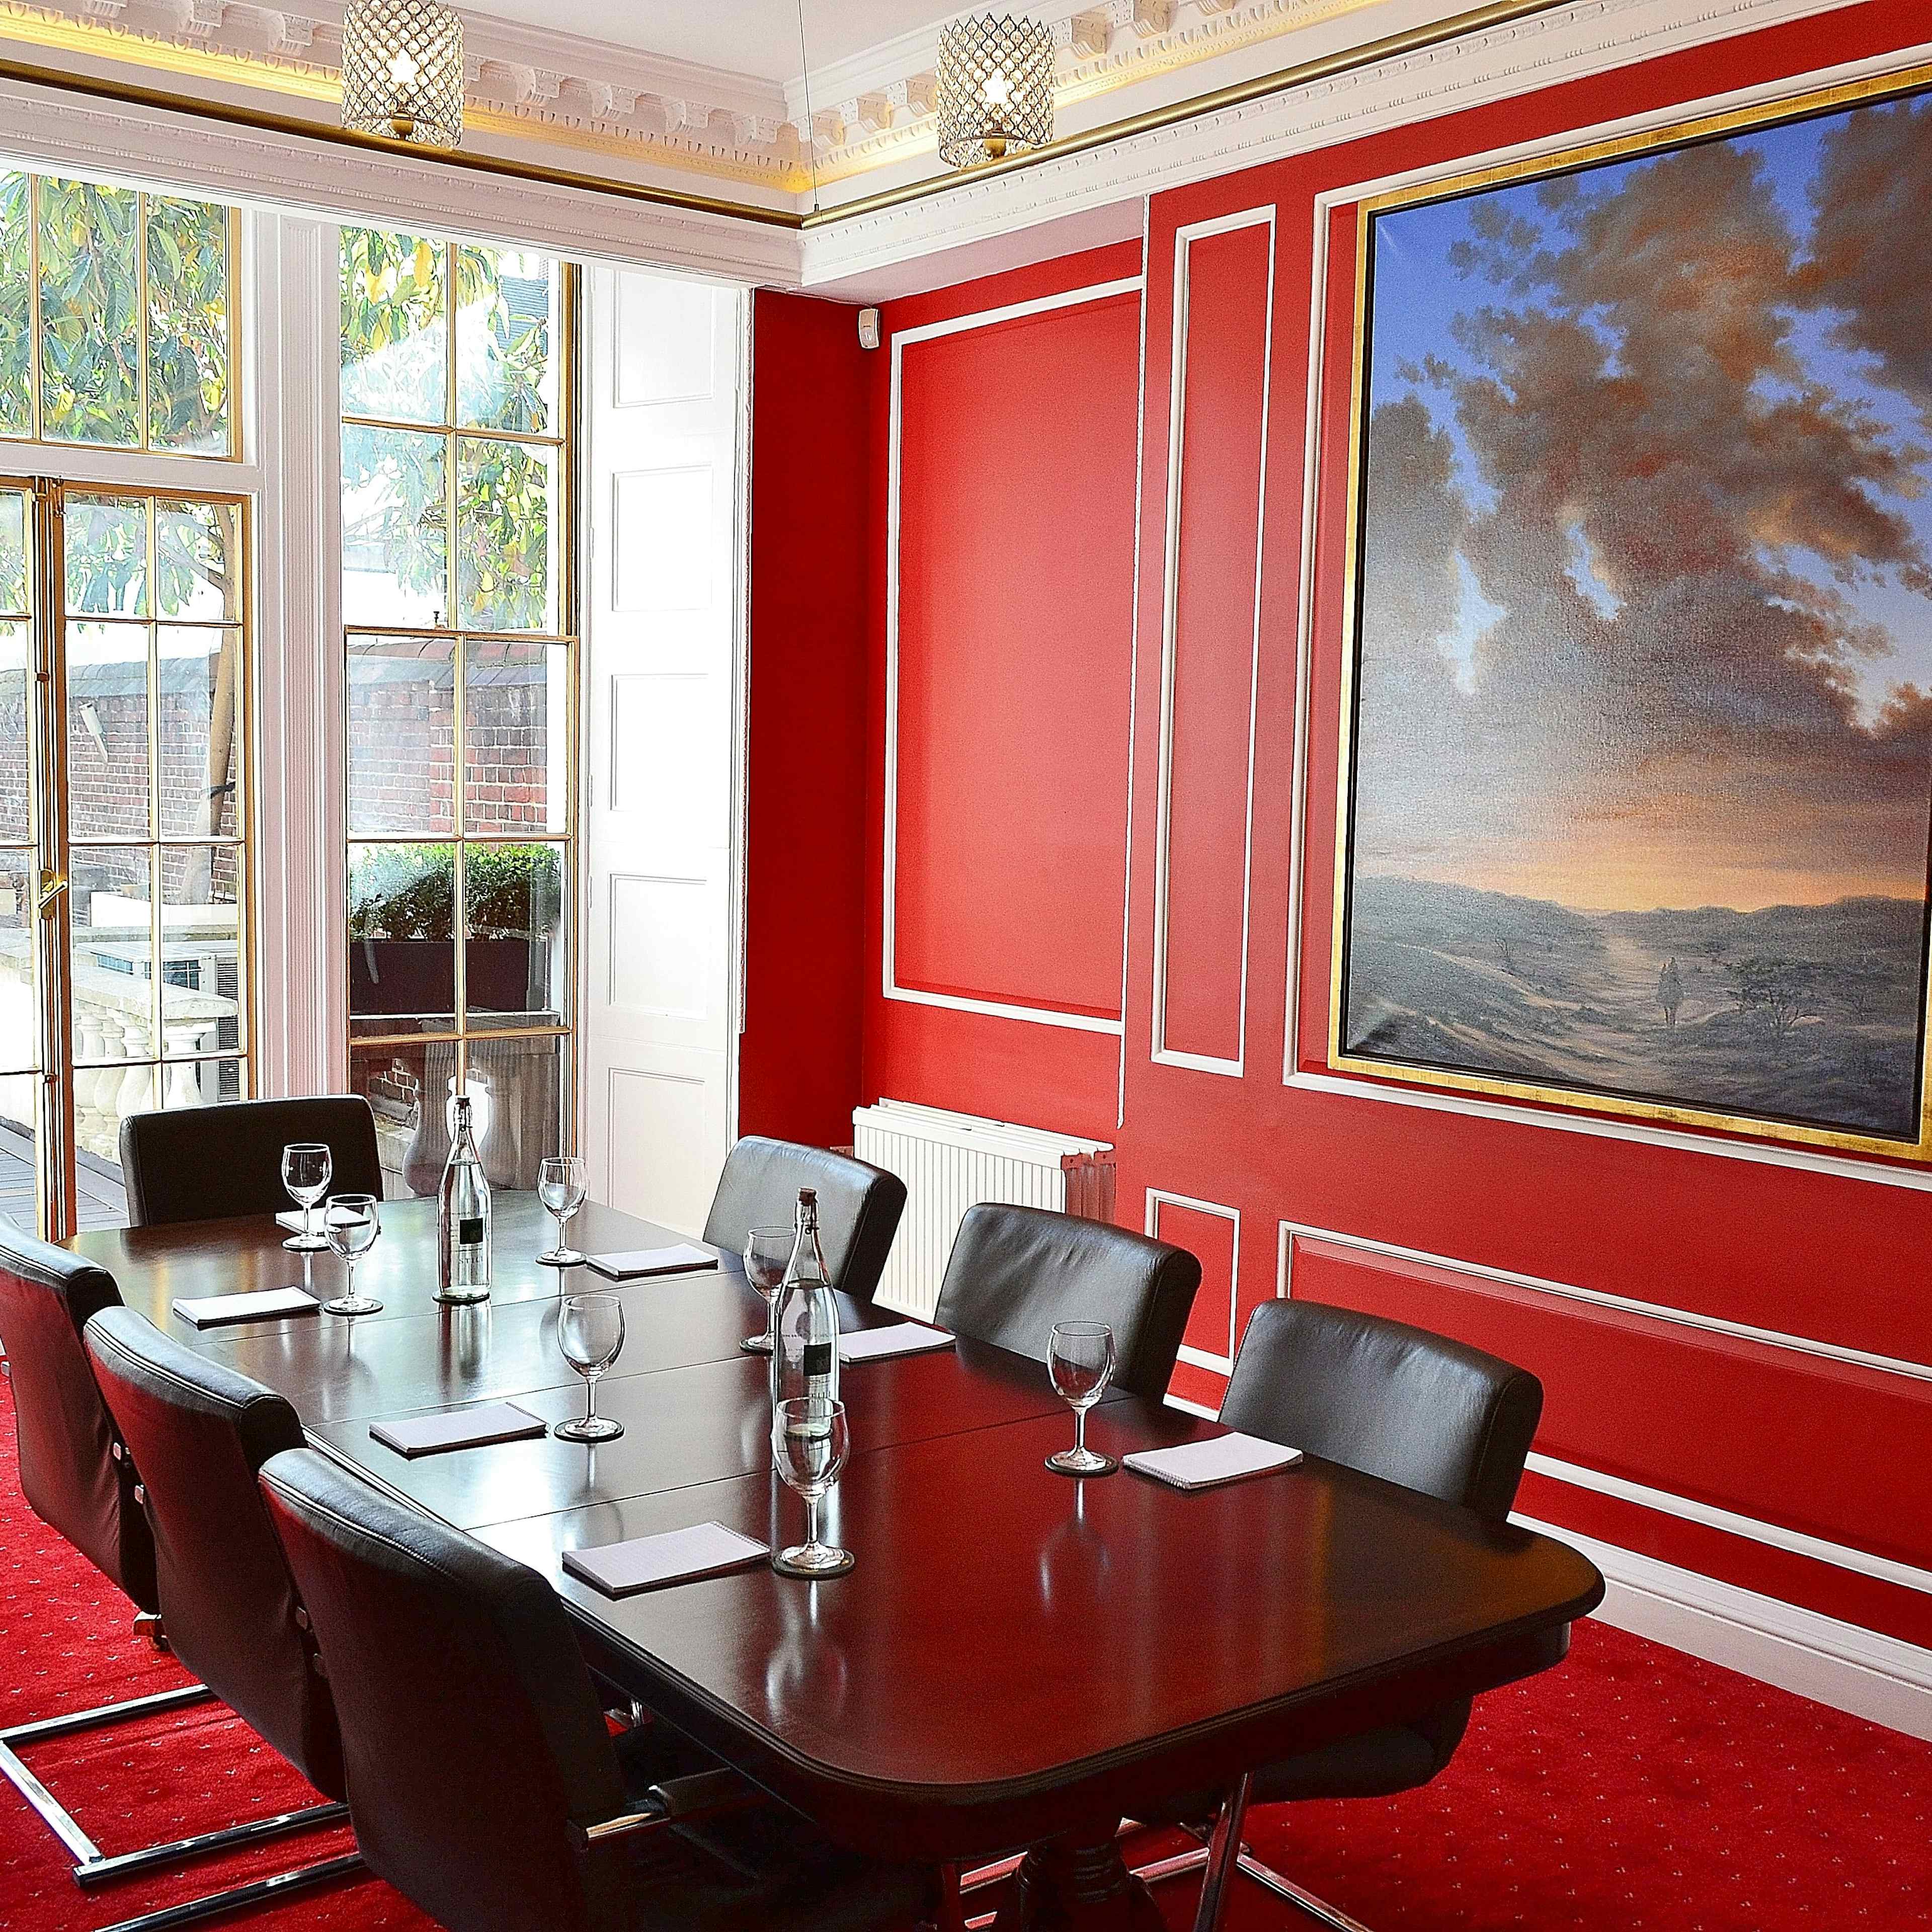 The Arab British Chamber of Commerce (ABCC) - The Ruby Salon image 2